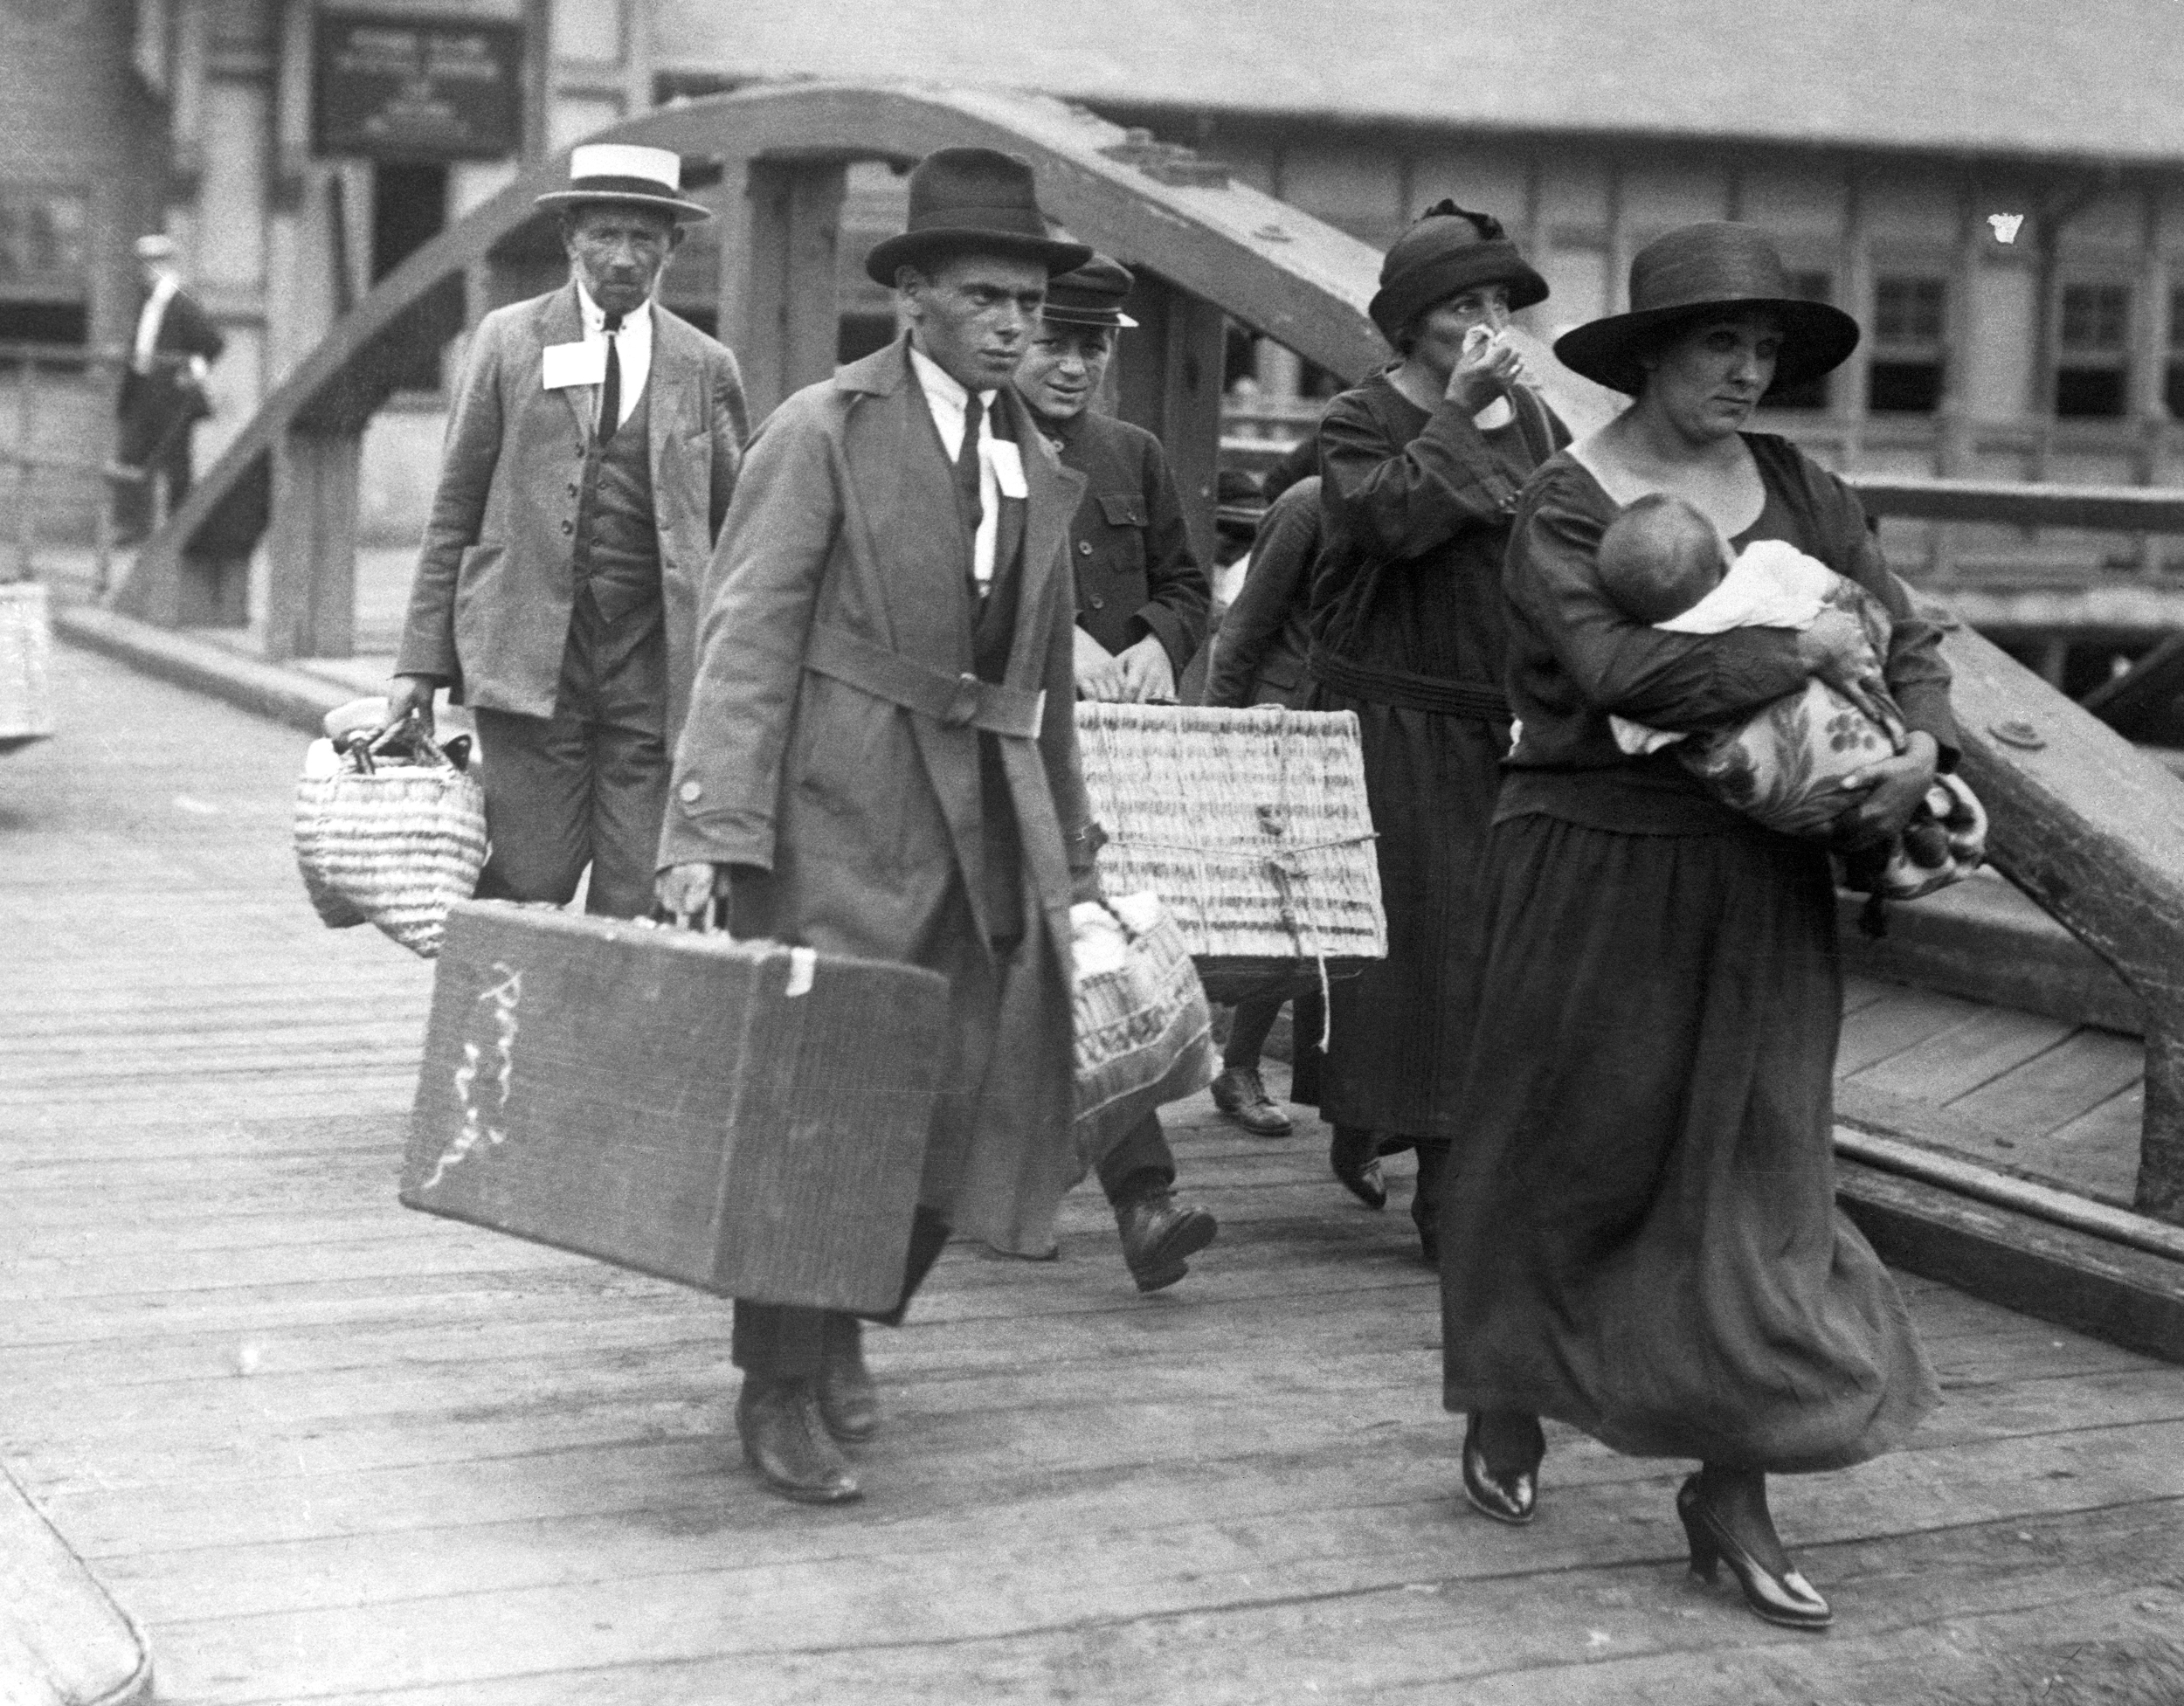 Ship loaded with immigrants, coming to New York. A Greek family embarking on Ellis Island, to come to America.